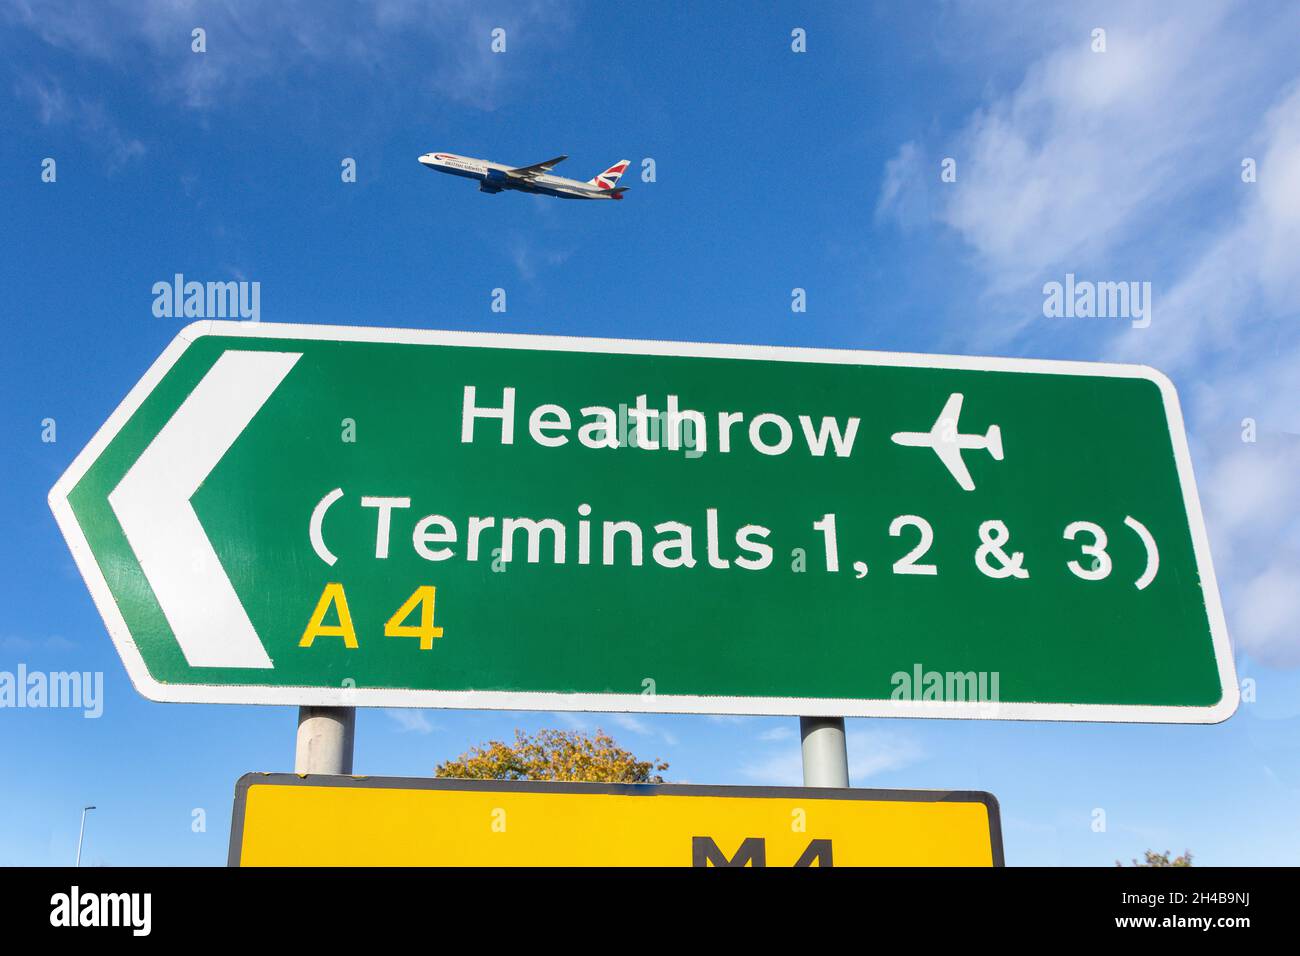 Heathrow Airport Road sign, Cranford, London Borough of Hounslow, Greater London, Angleterre, Royaume-Uni Banque D'Images